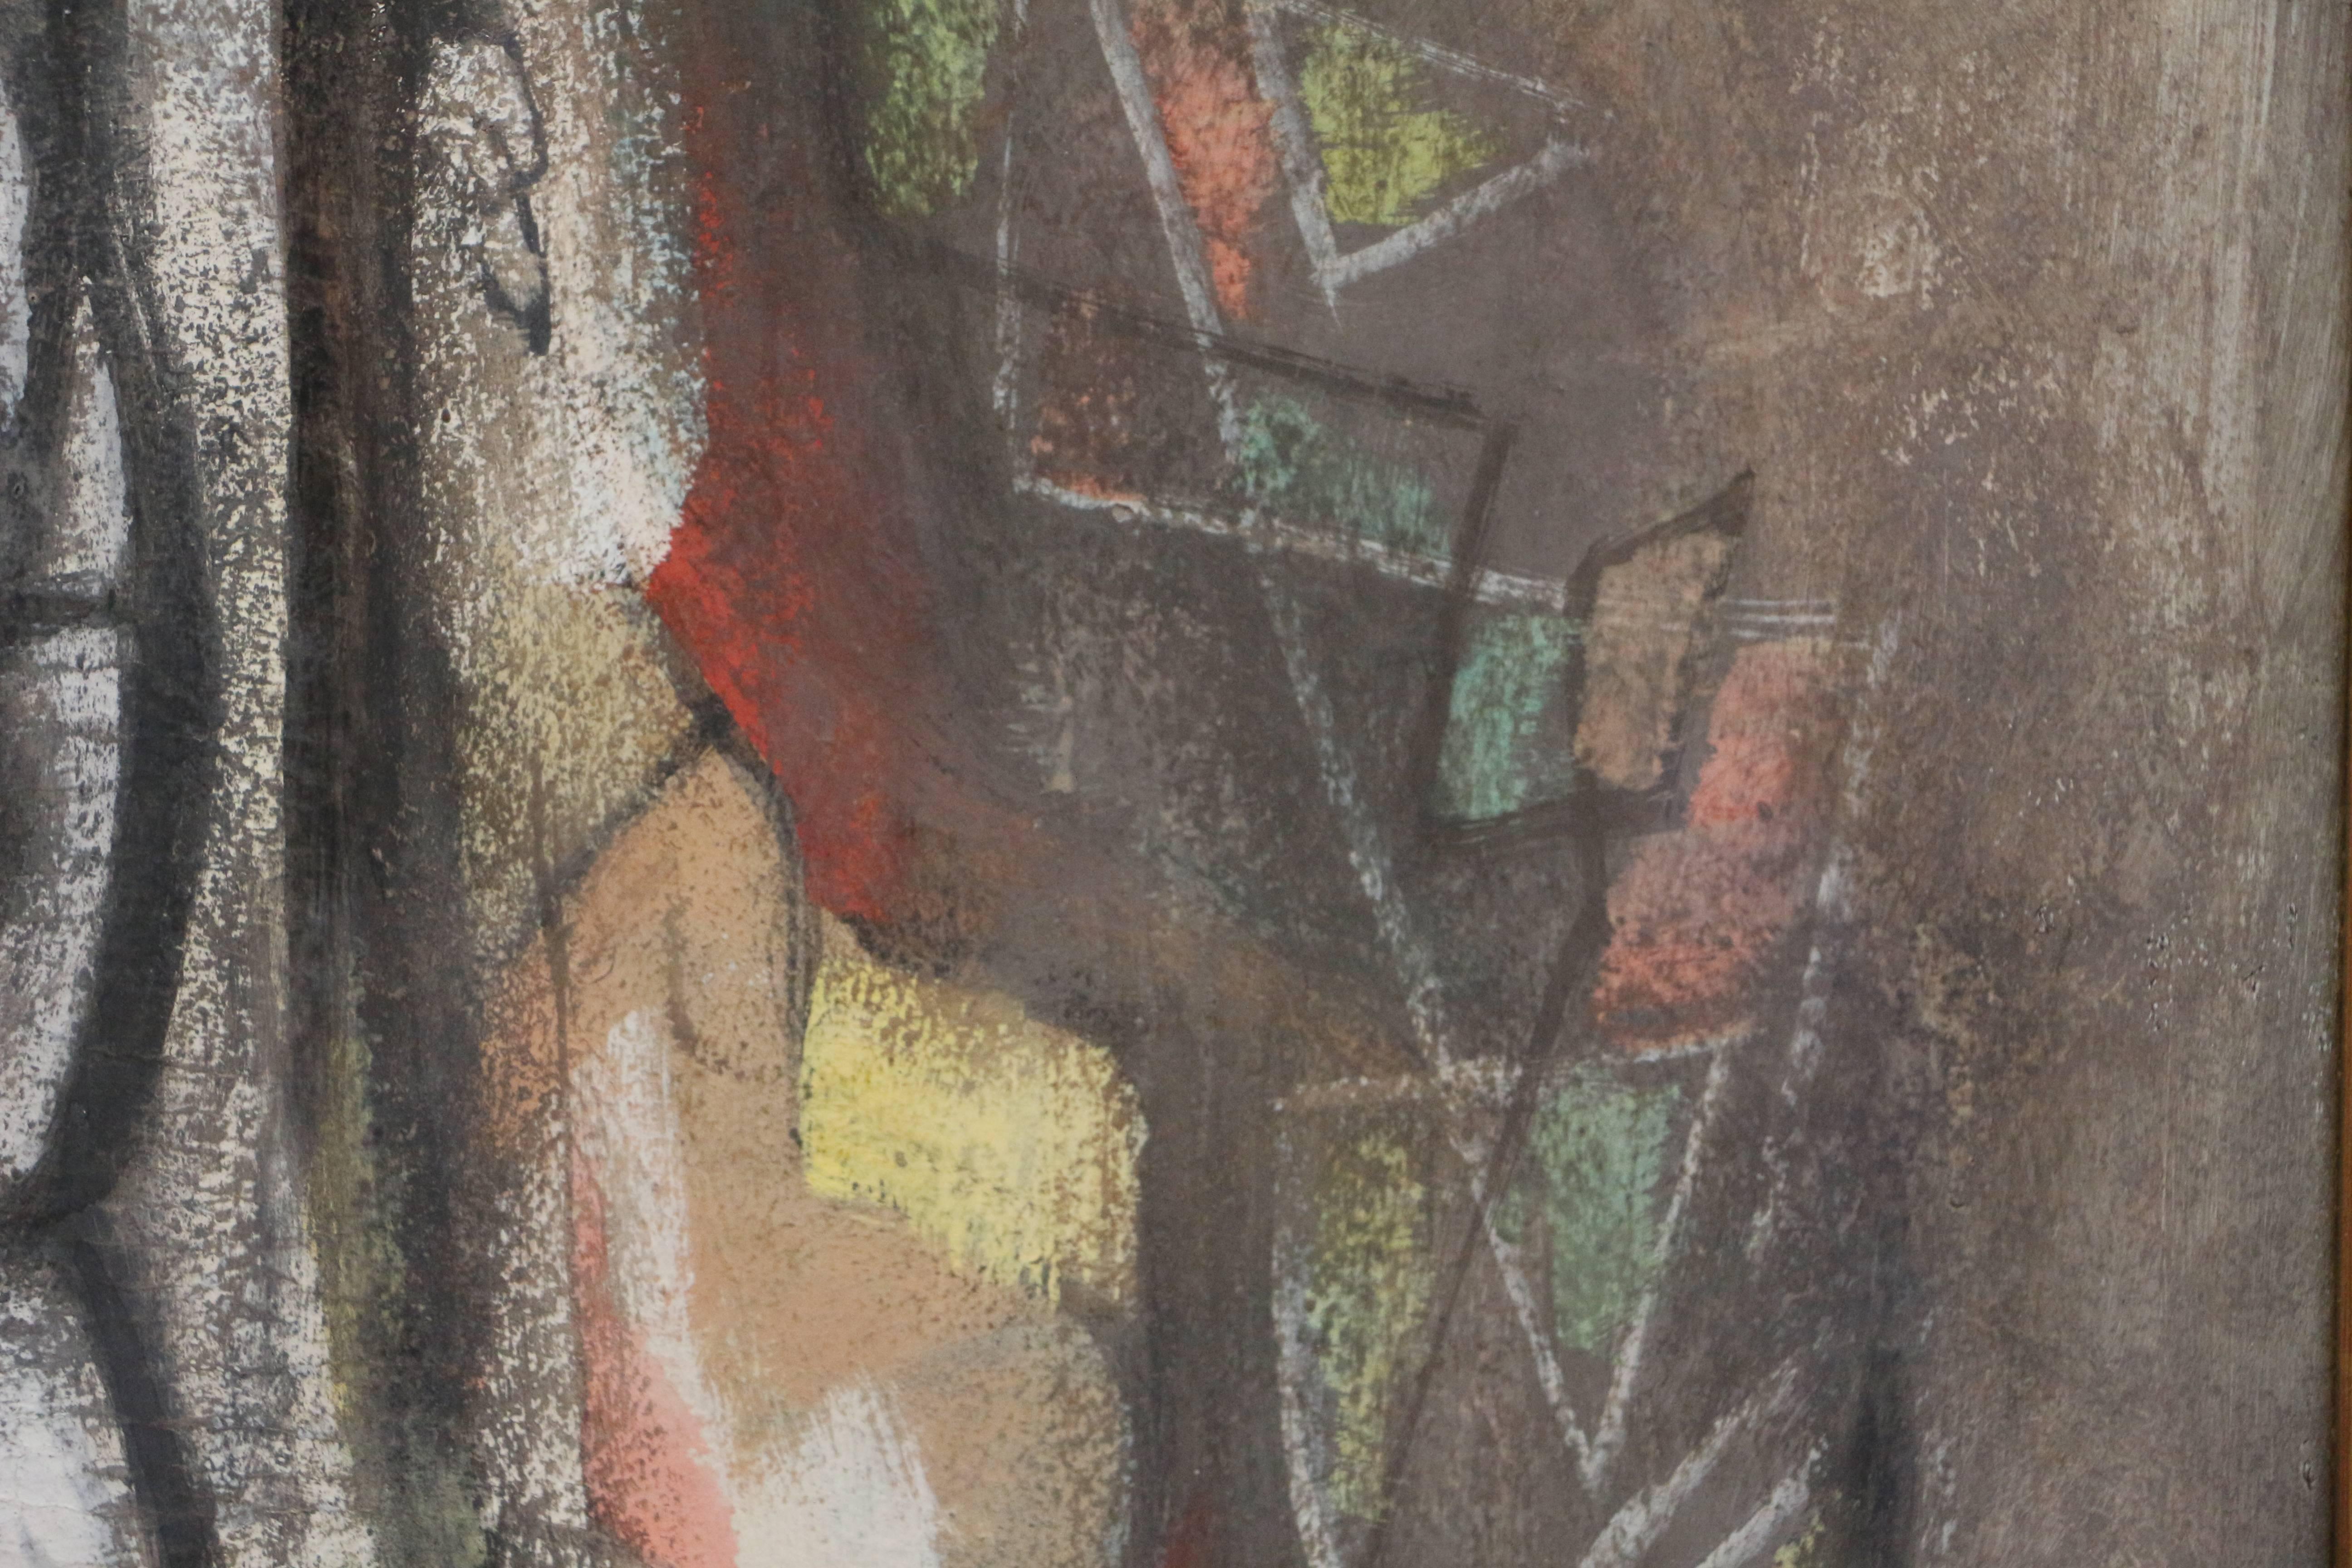 Untitled Composition with Figure, cubist work with central figure For Sale 3